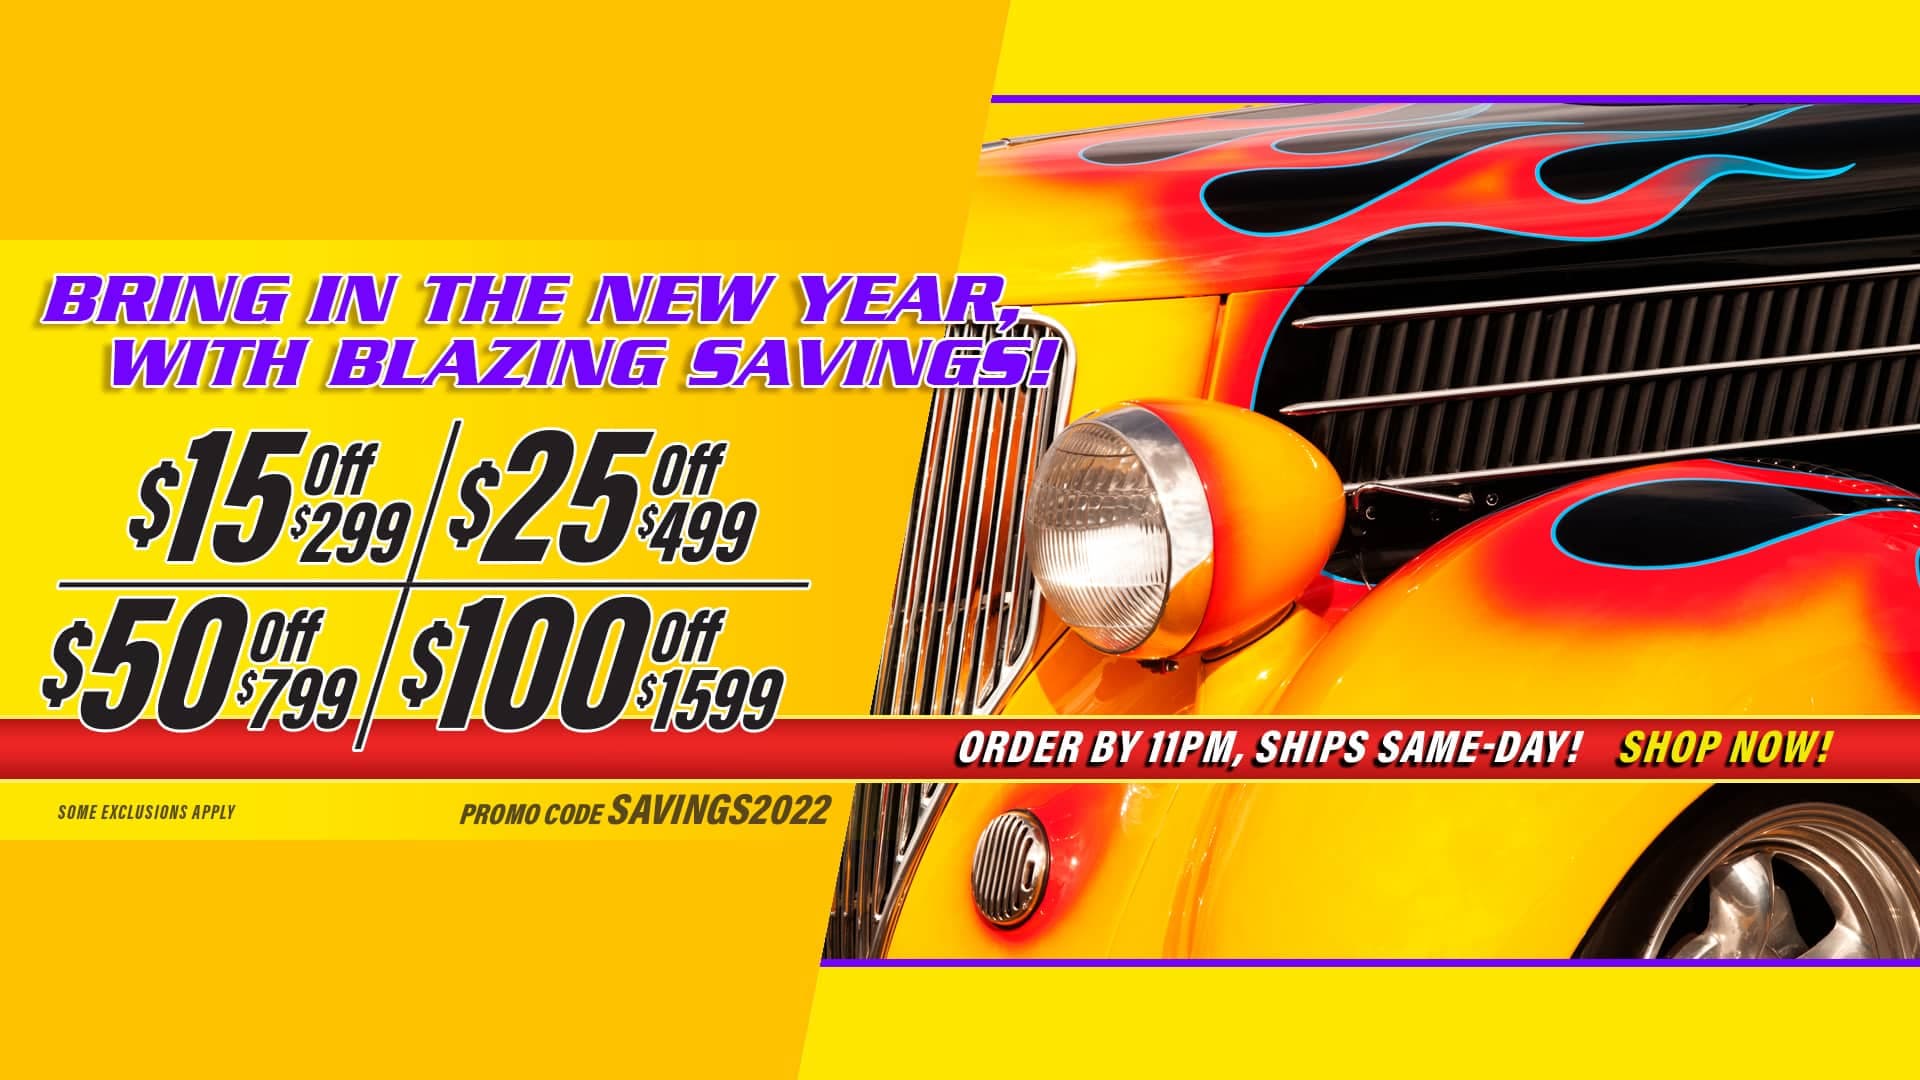 Save $15 Off $299, $25 Off $499, $50 Off $799, $100 Off $1,599 - SAVINGS2022